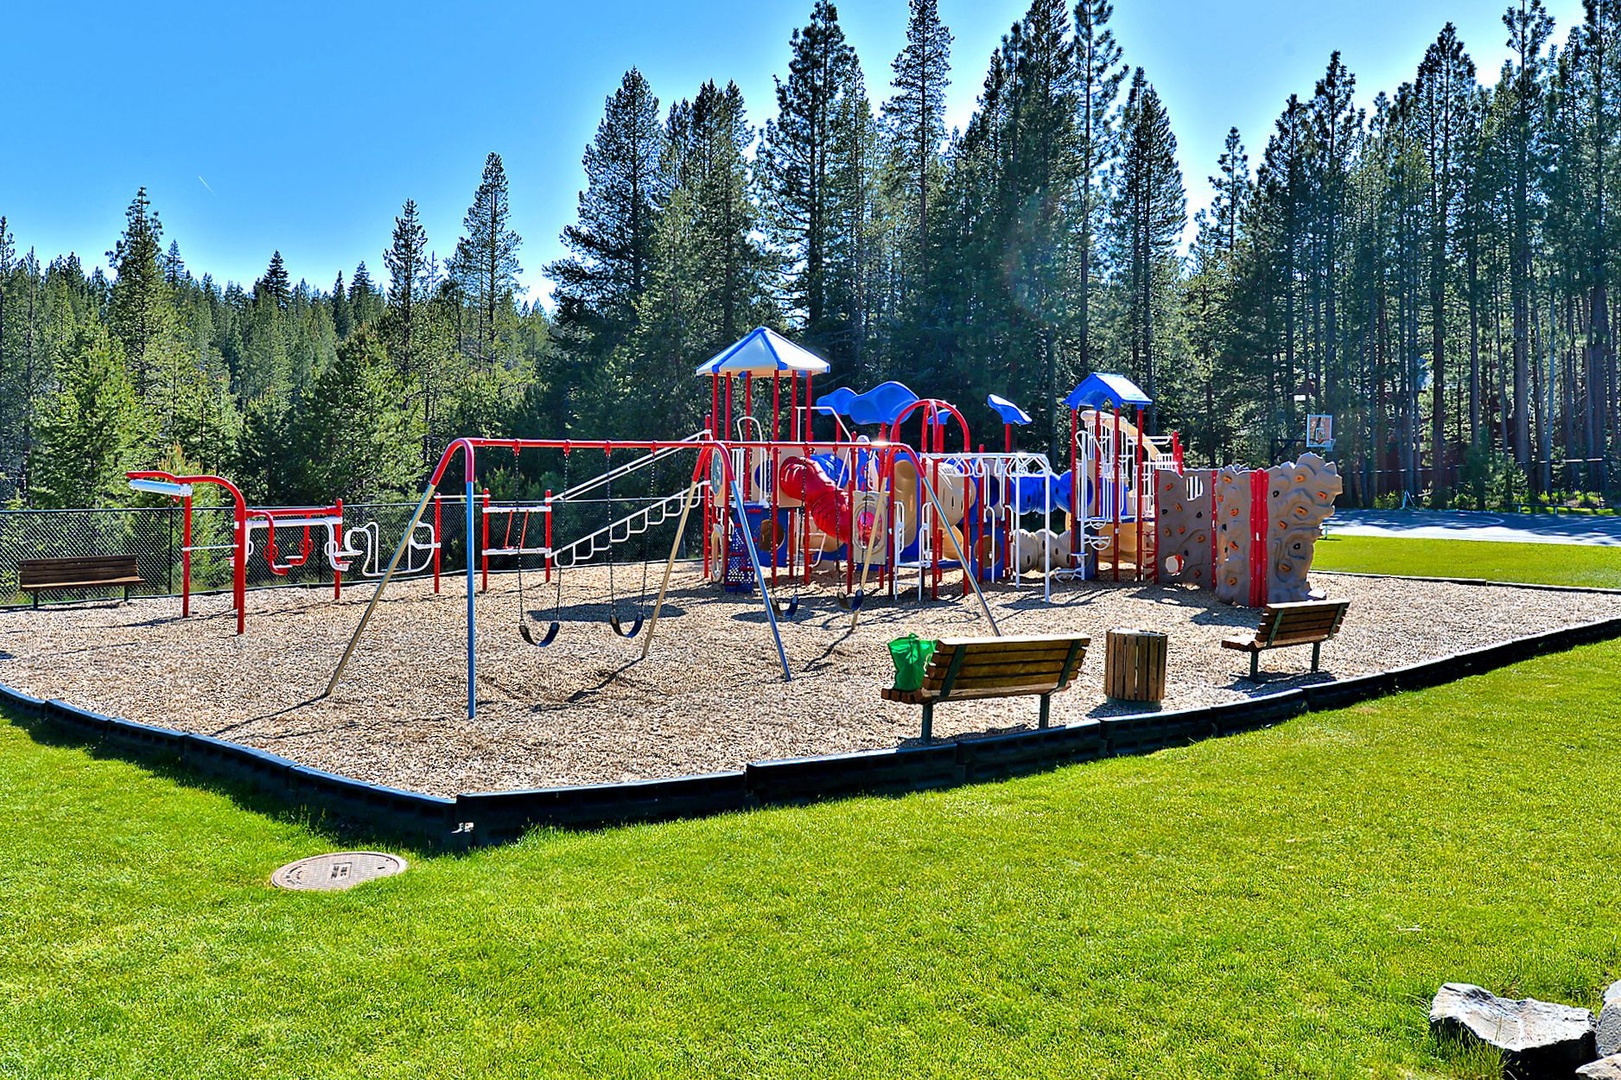 Trout Creek Rec. Center: Camp Howdy in Tahoe Donner